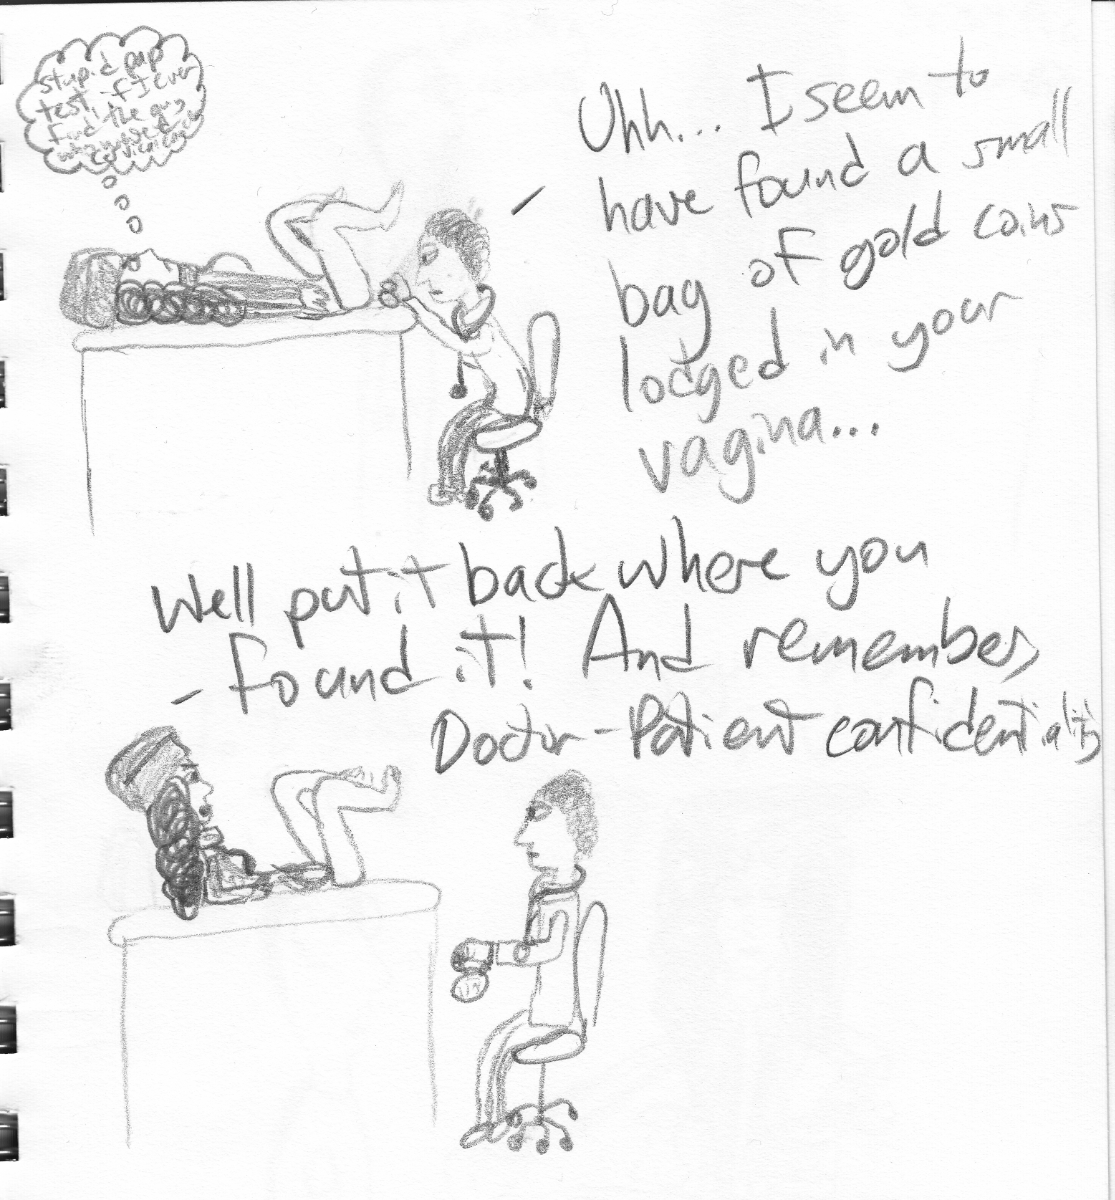 Frame one: Captenne is lying on an examination table with no pants on and her legs propped up. She has a thought bubble that starts with 'stupid pap test' but the writing gets too messy to be legible (sorry!). A doctor is sitting on a chair giving the pap test and says: 'Uhh...I seem to have found a small bag of gold coins lodged in your vagina...' Frame two: Captenne with a threatening look on her face: 'Well put it back where you found it! And remember, doctor-patient confidentiality!'